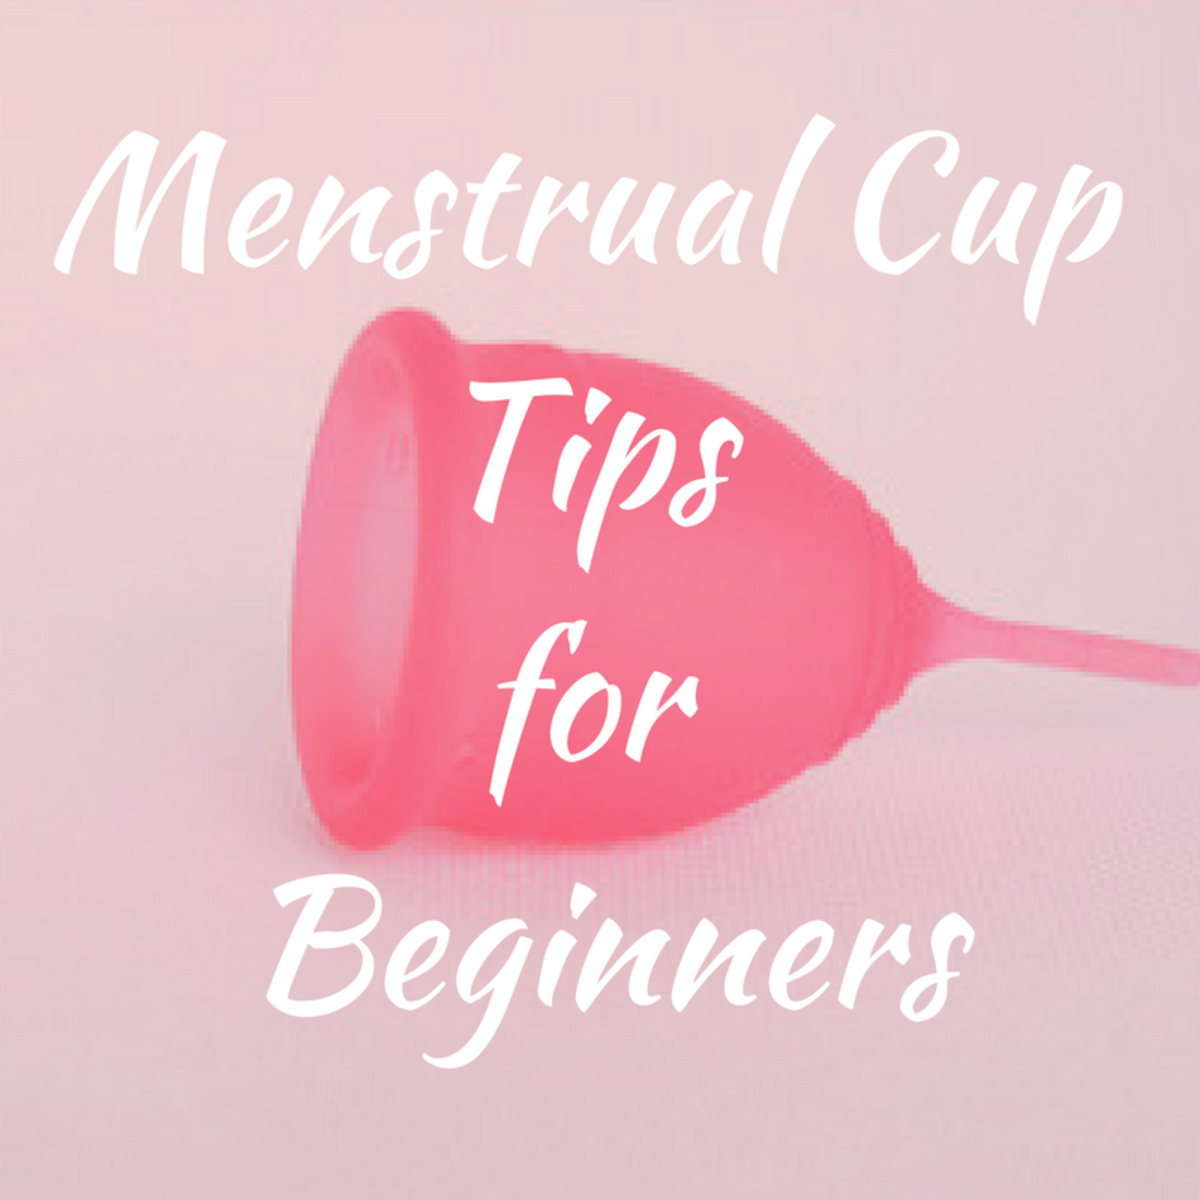 Menstrual Cup Tips for Beginners